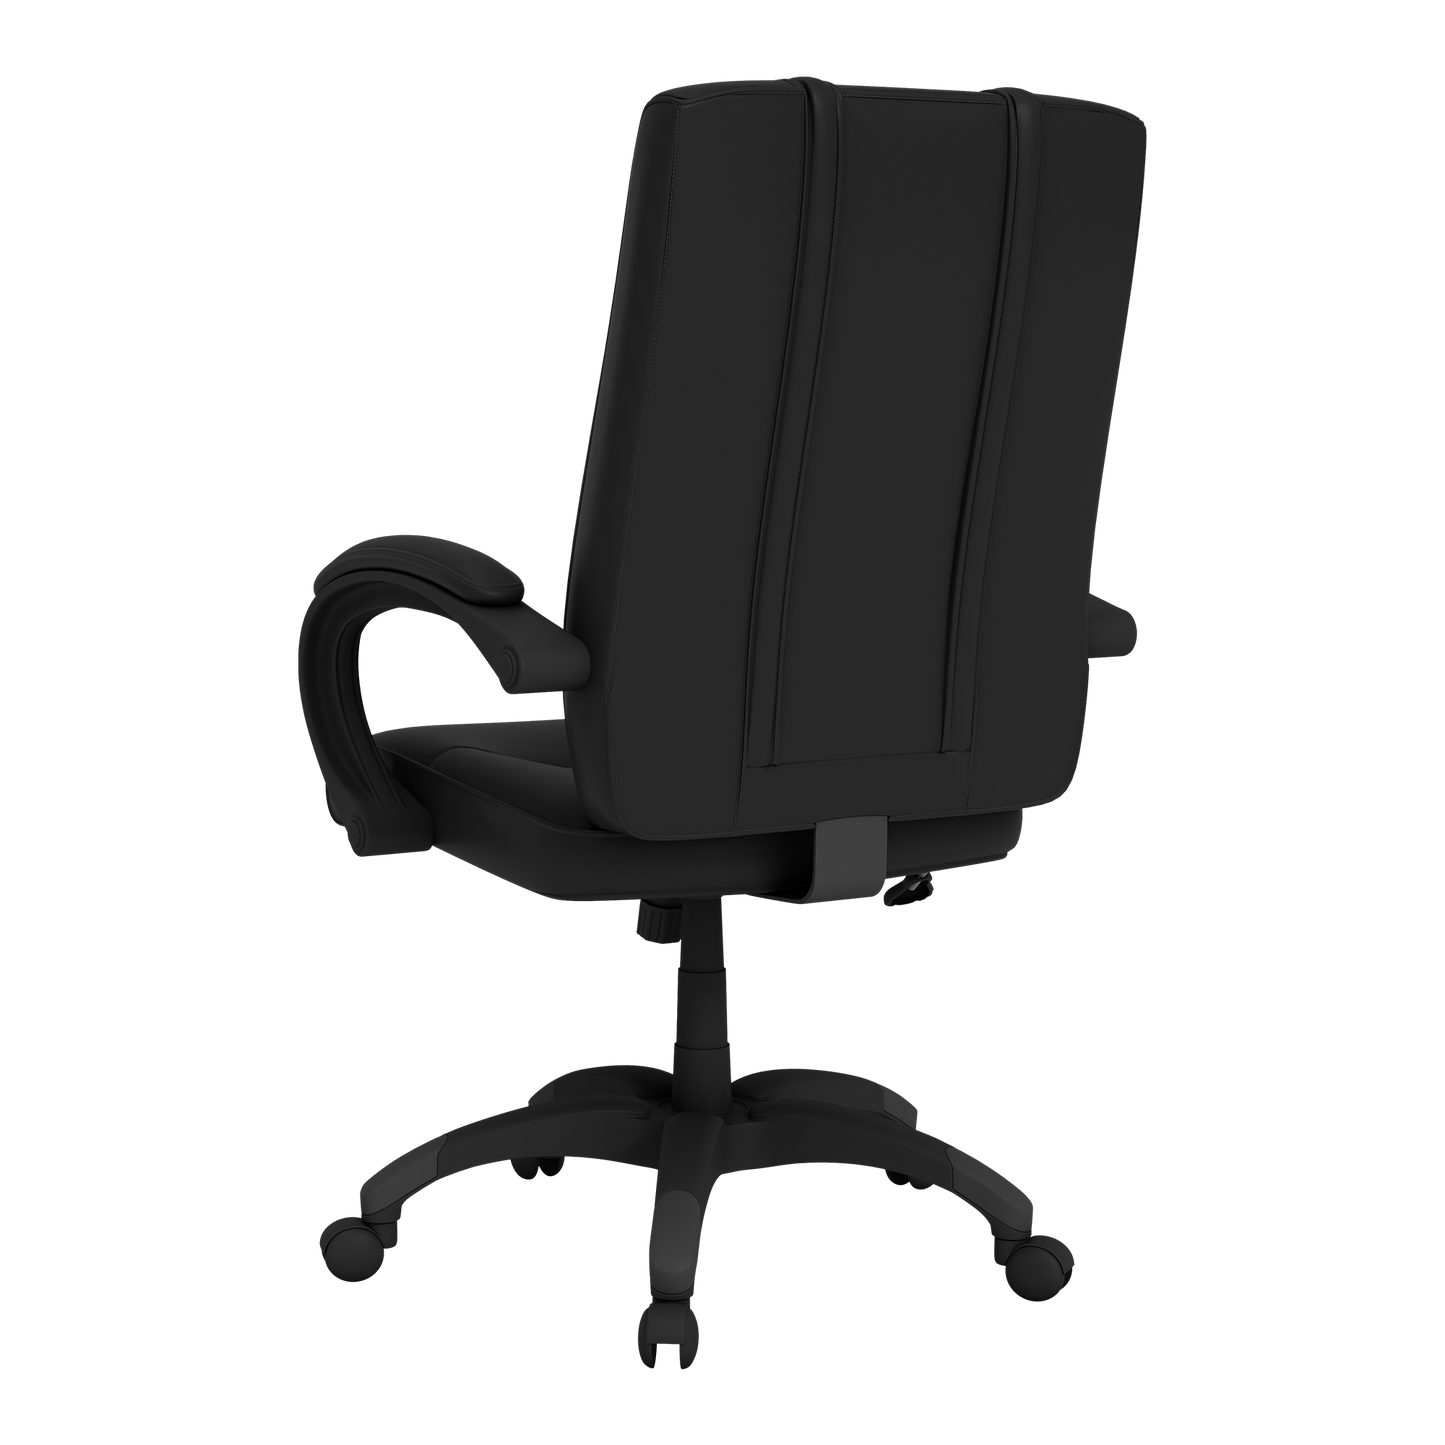 Office Chair 1000 with Houston Astros Cooperstown